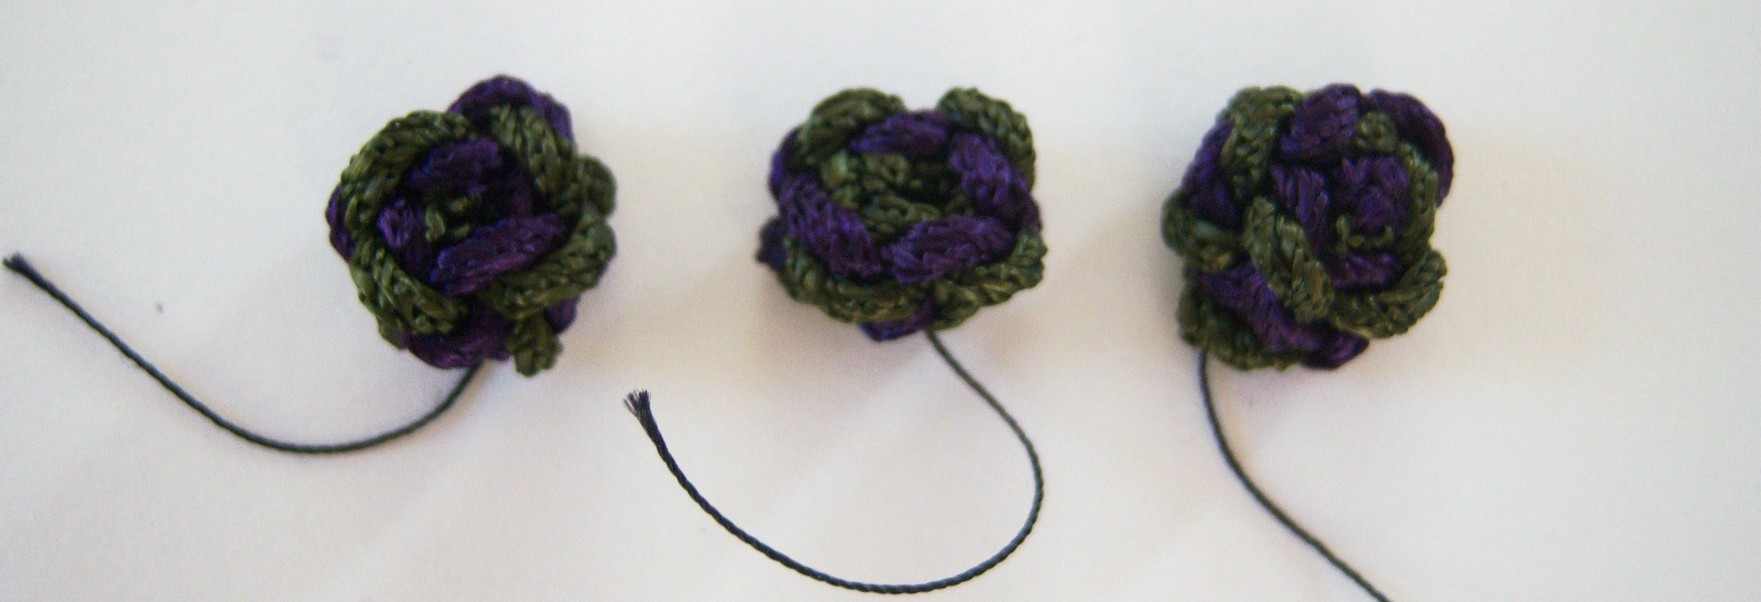 Chinese Knot Button Olive/Purple